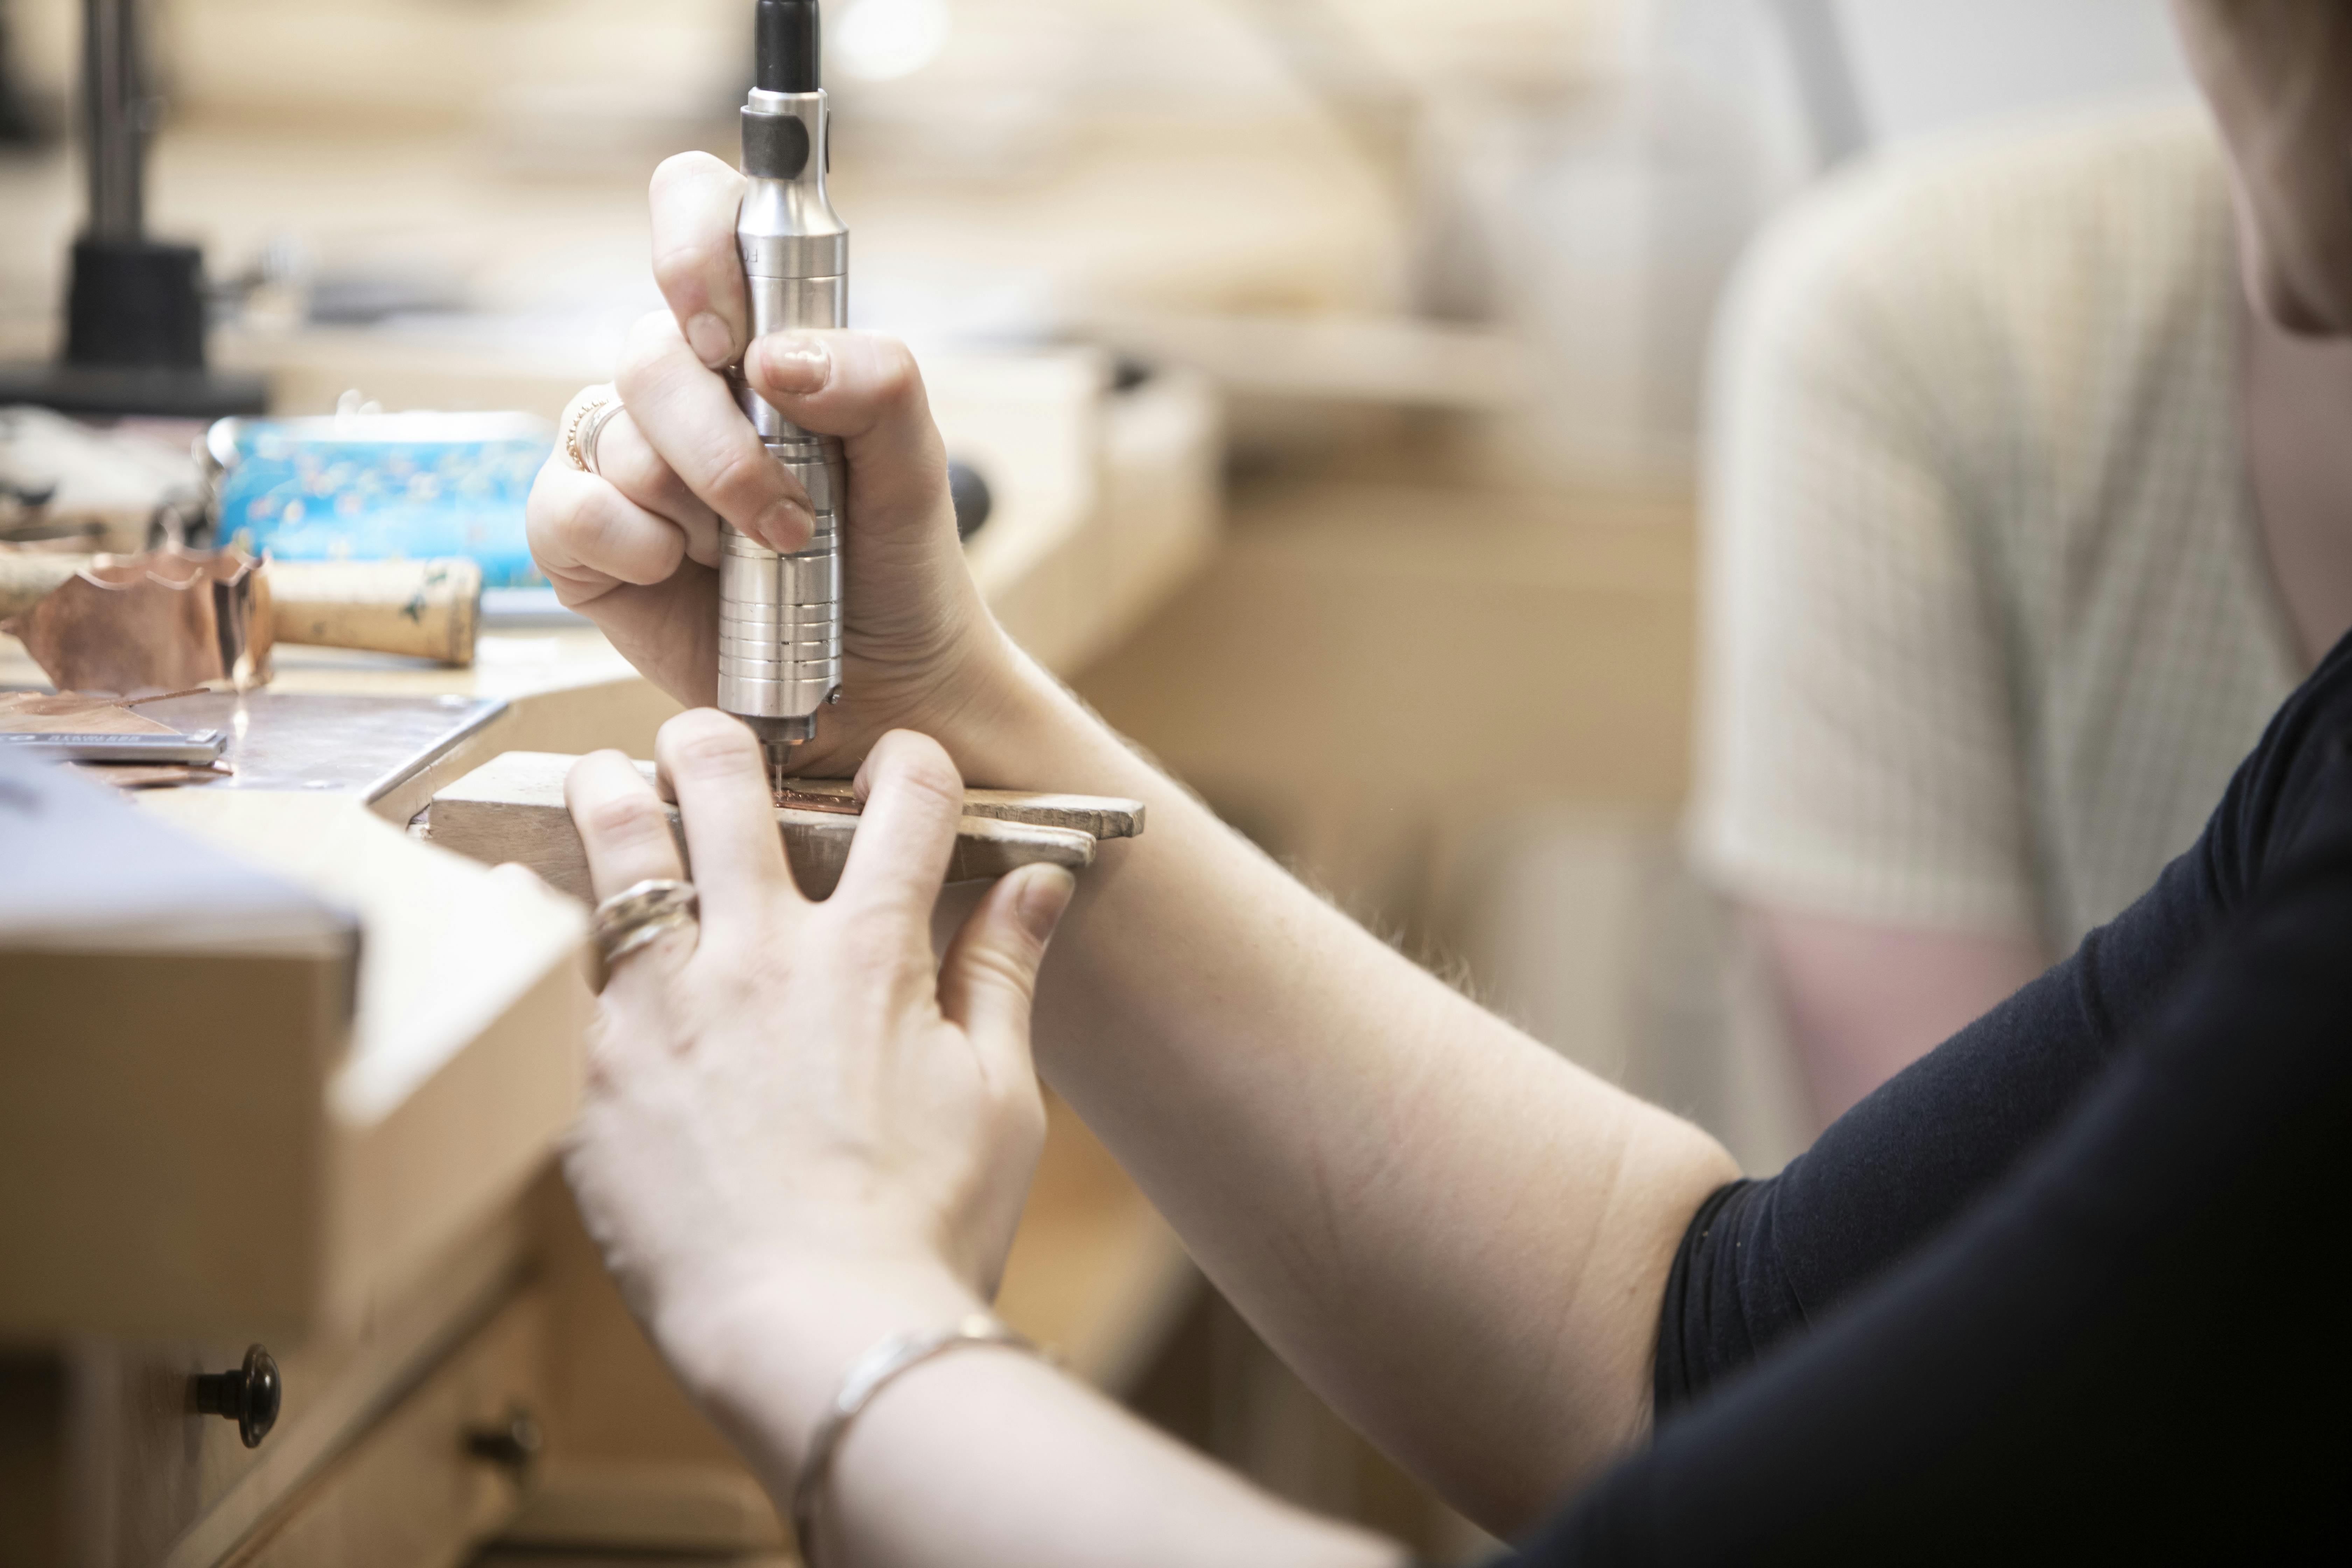 A pair of hands uses a metal tool and a wooden clamp to make jewelry.